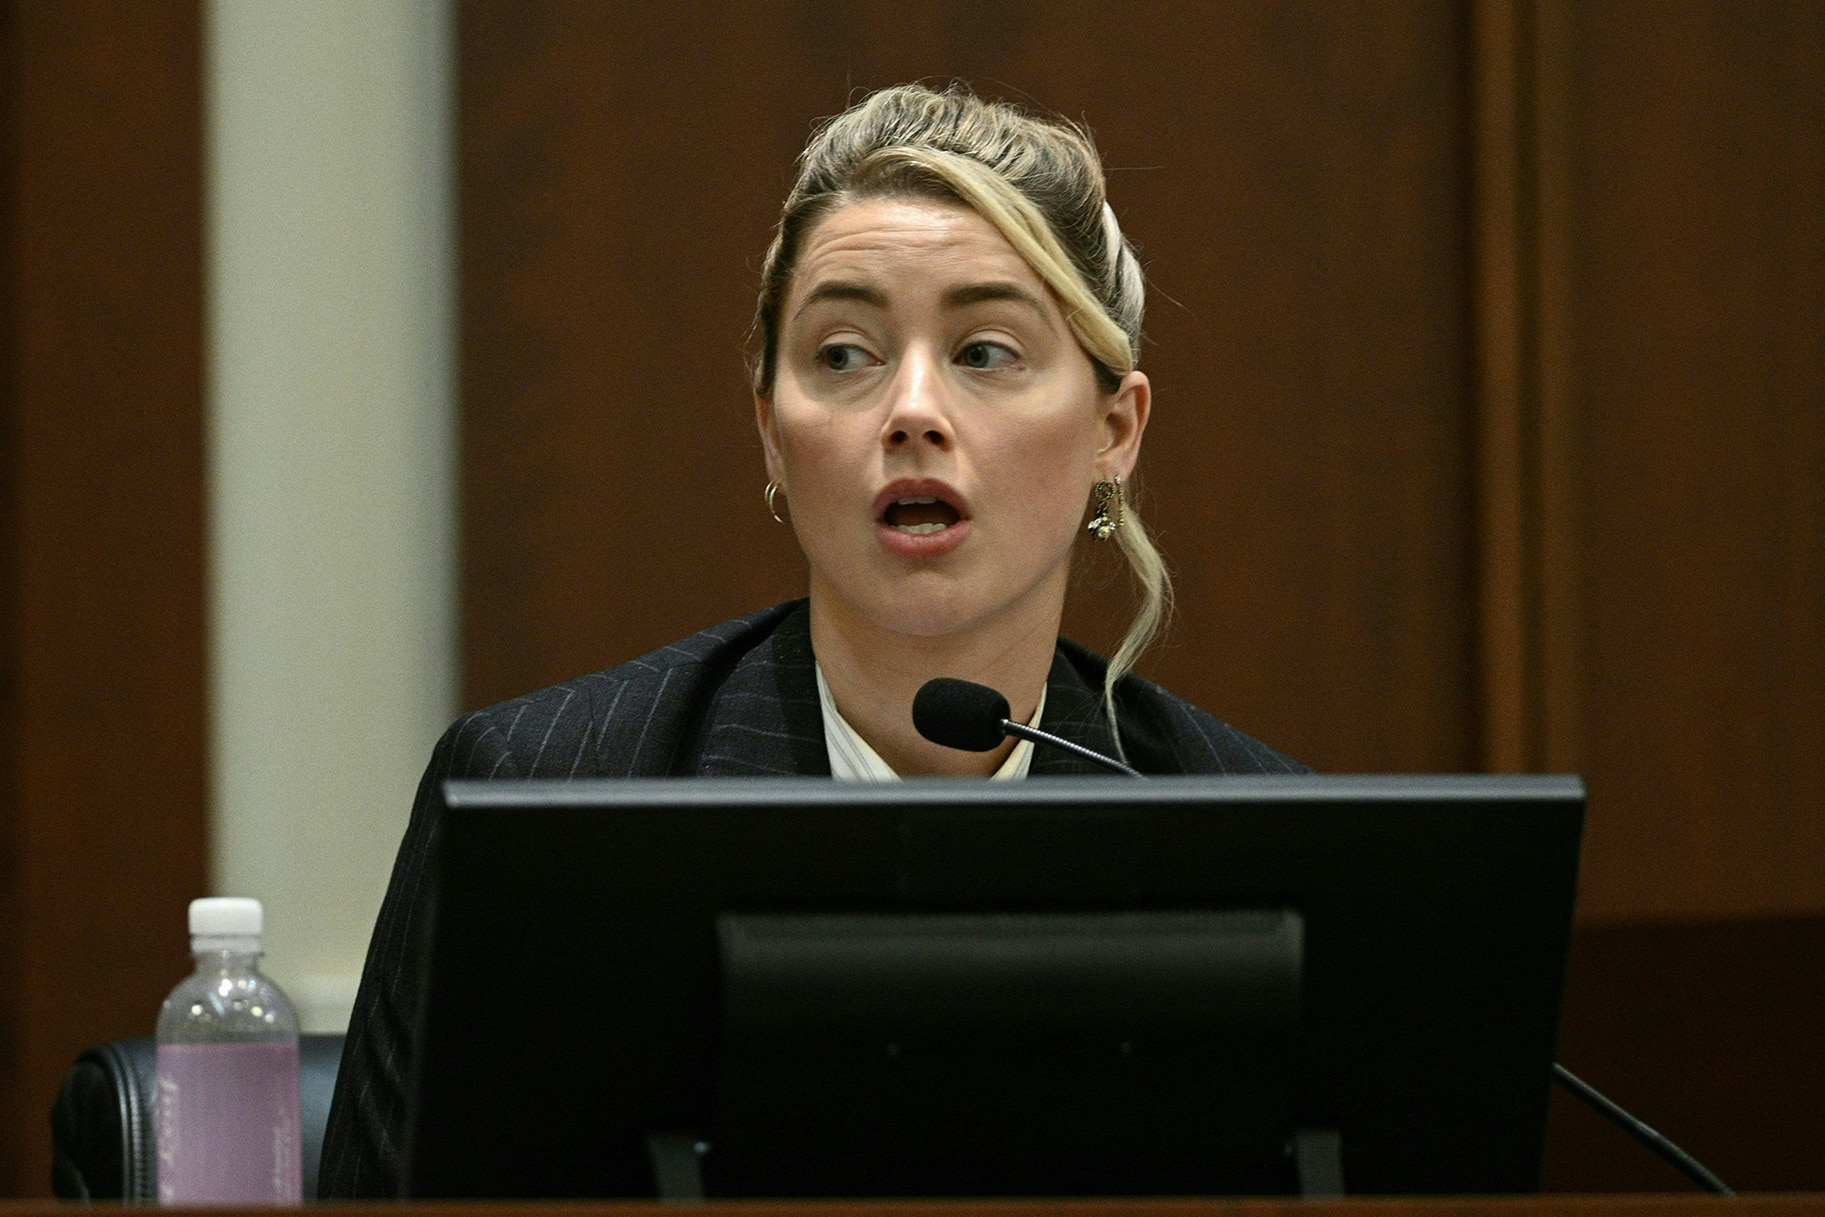 Amber Heard testifies in the courtroom on May 17, 2022